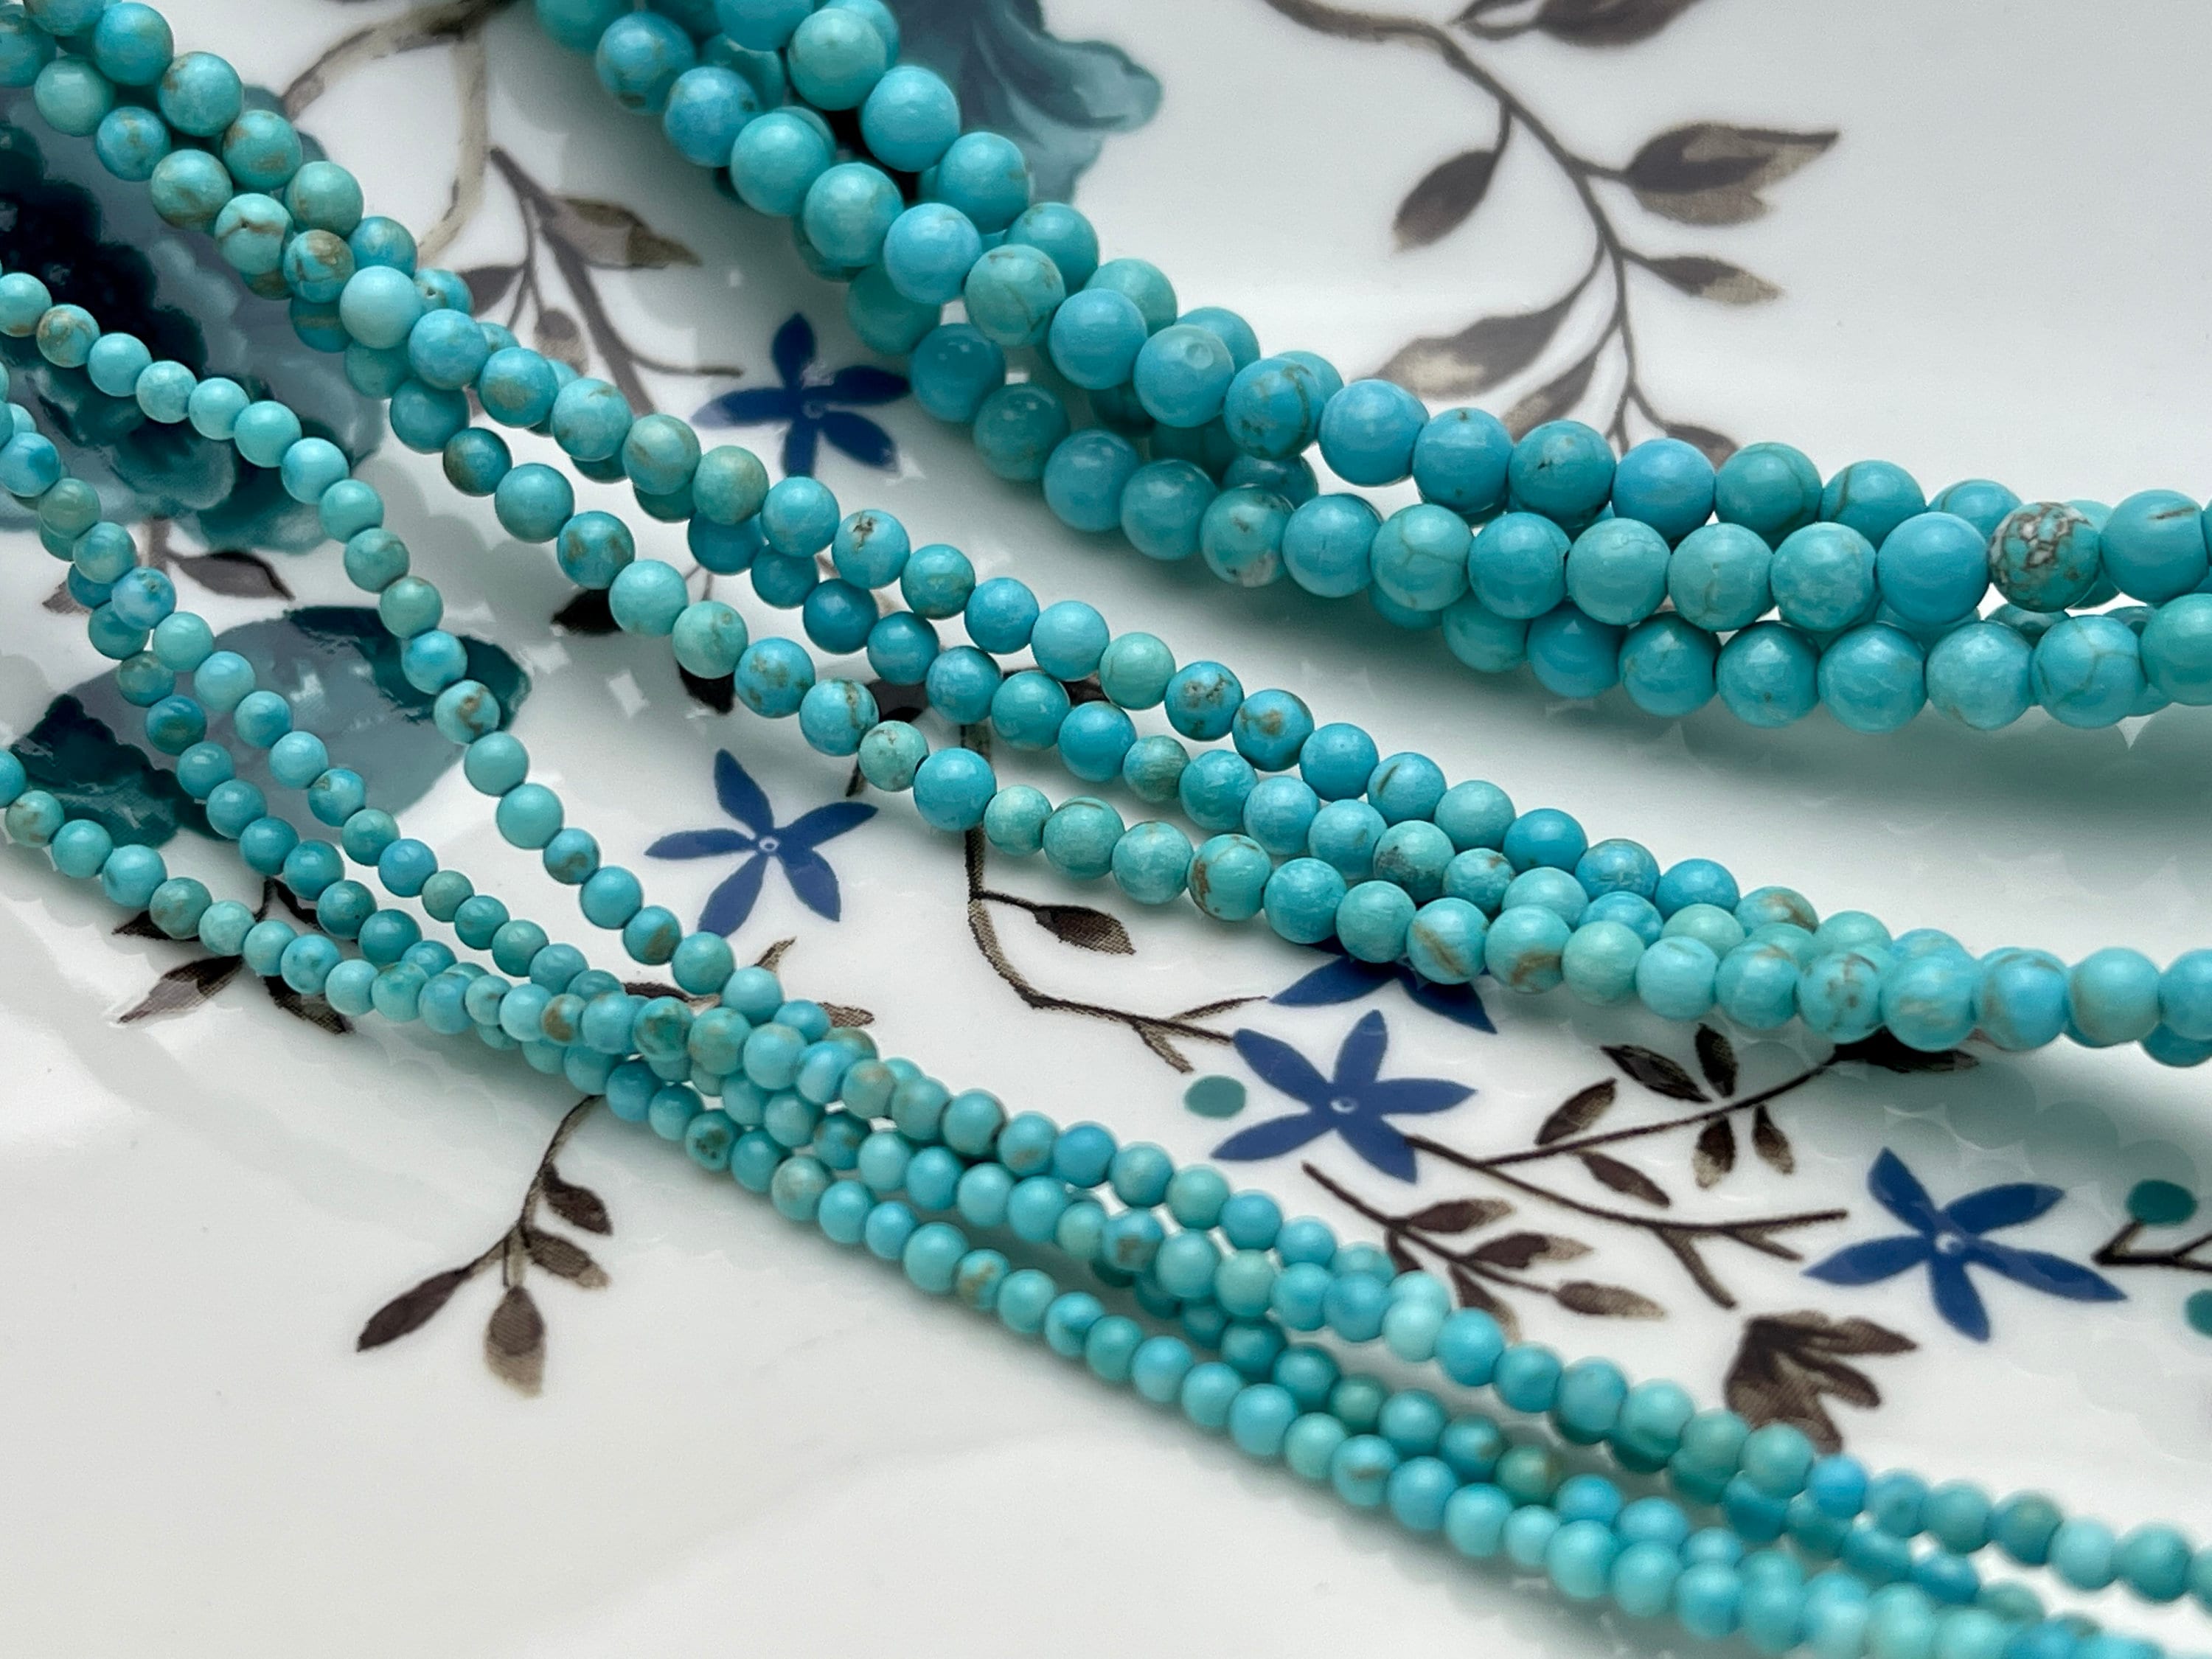 Turquoise Beige Cross Shaped Beads,10mm, 16mm, 20mm Long Cross Beads,  Jewelry Making Beads, Focal Beads, 25 Beads per Strand 